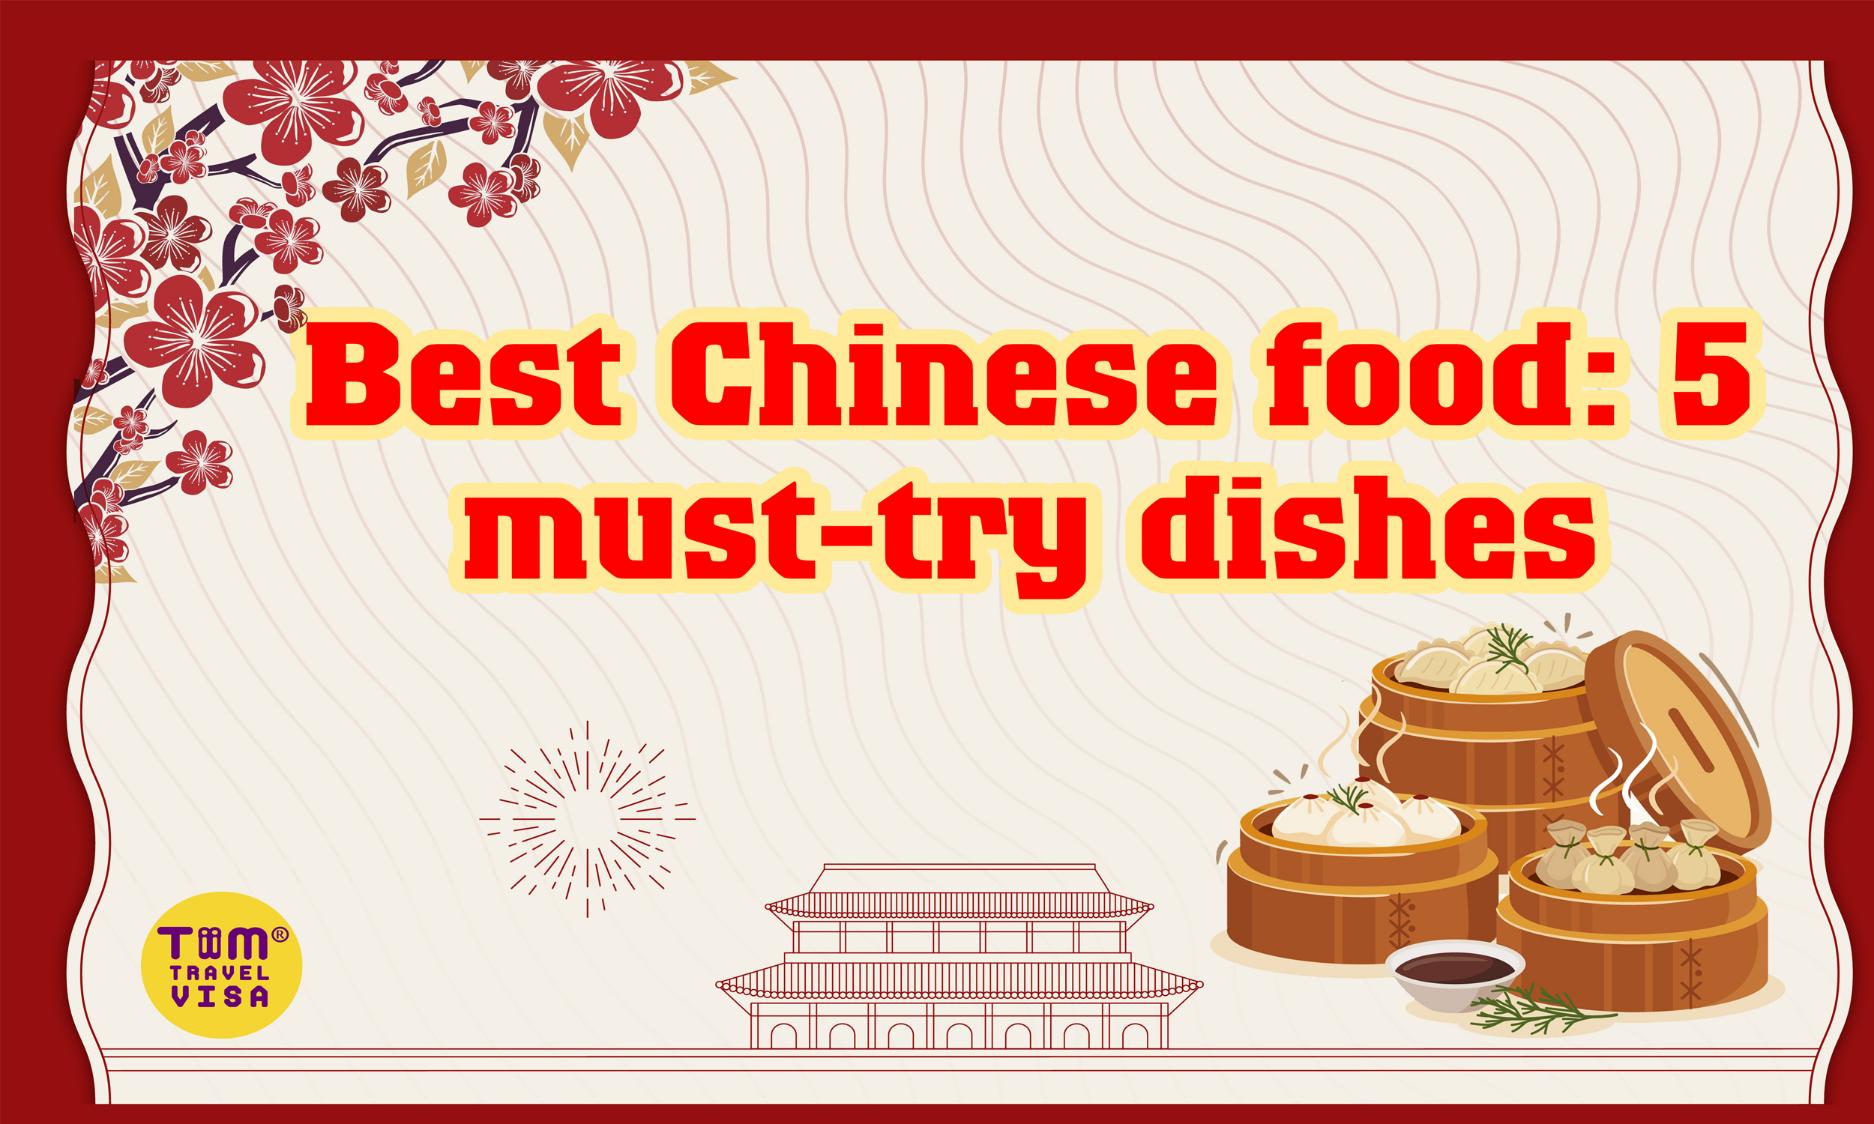 Best Chinese food: 5 must-try dishes